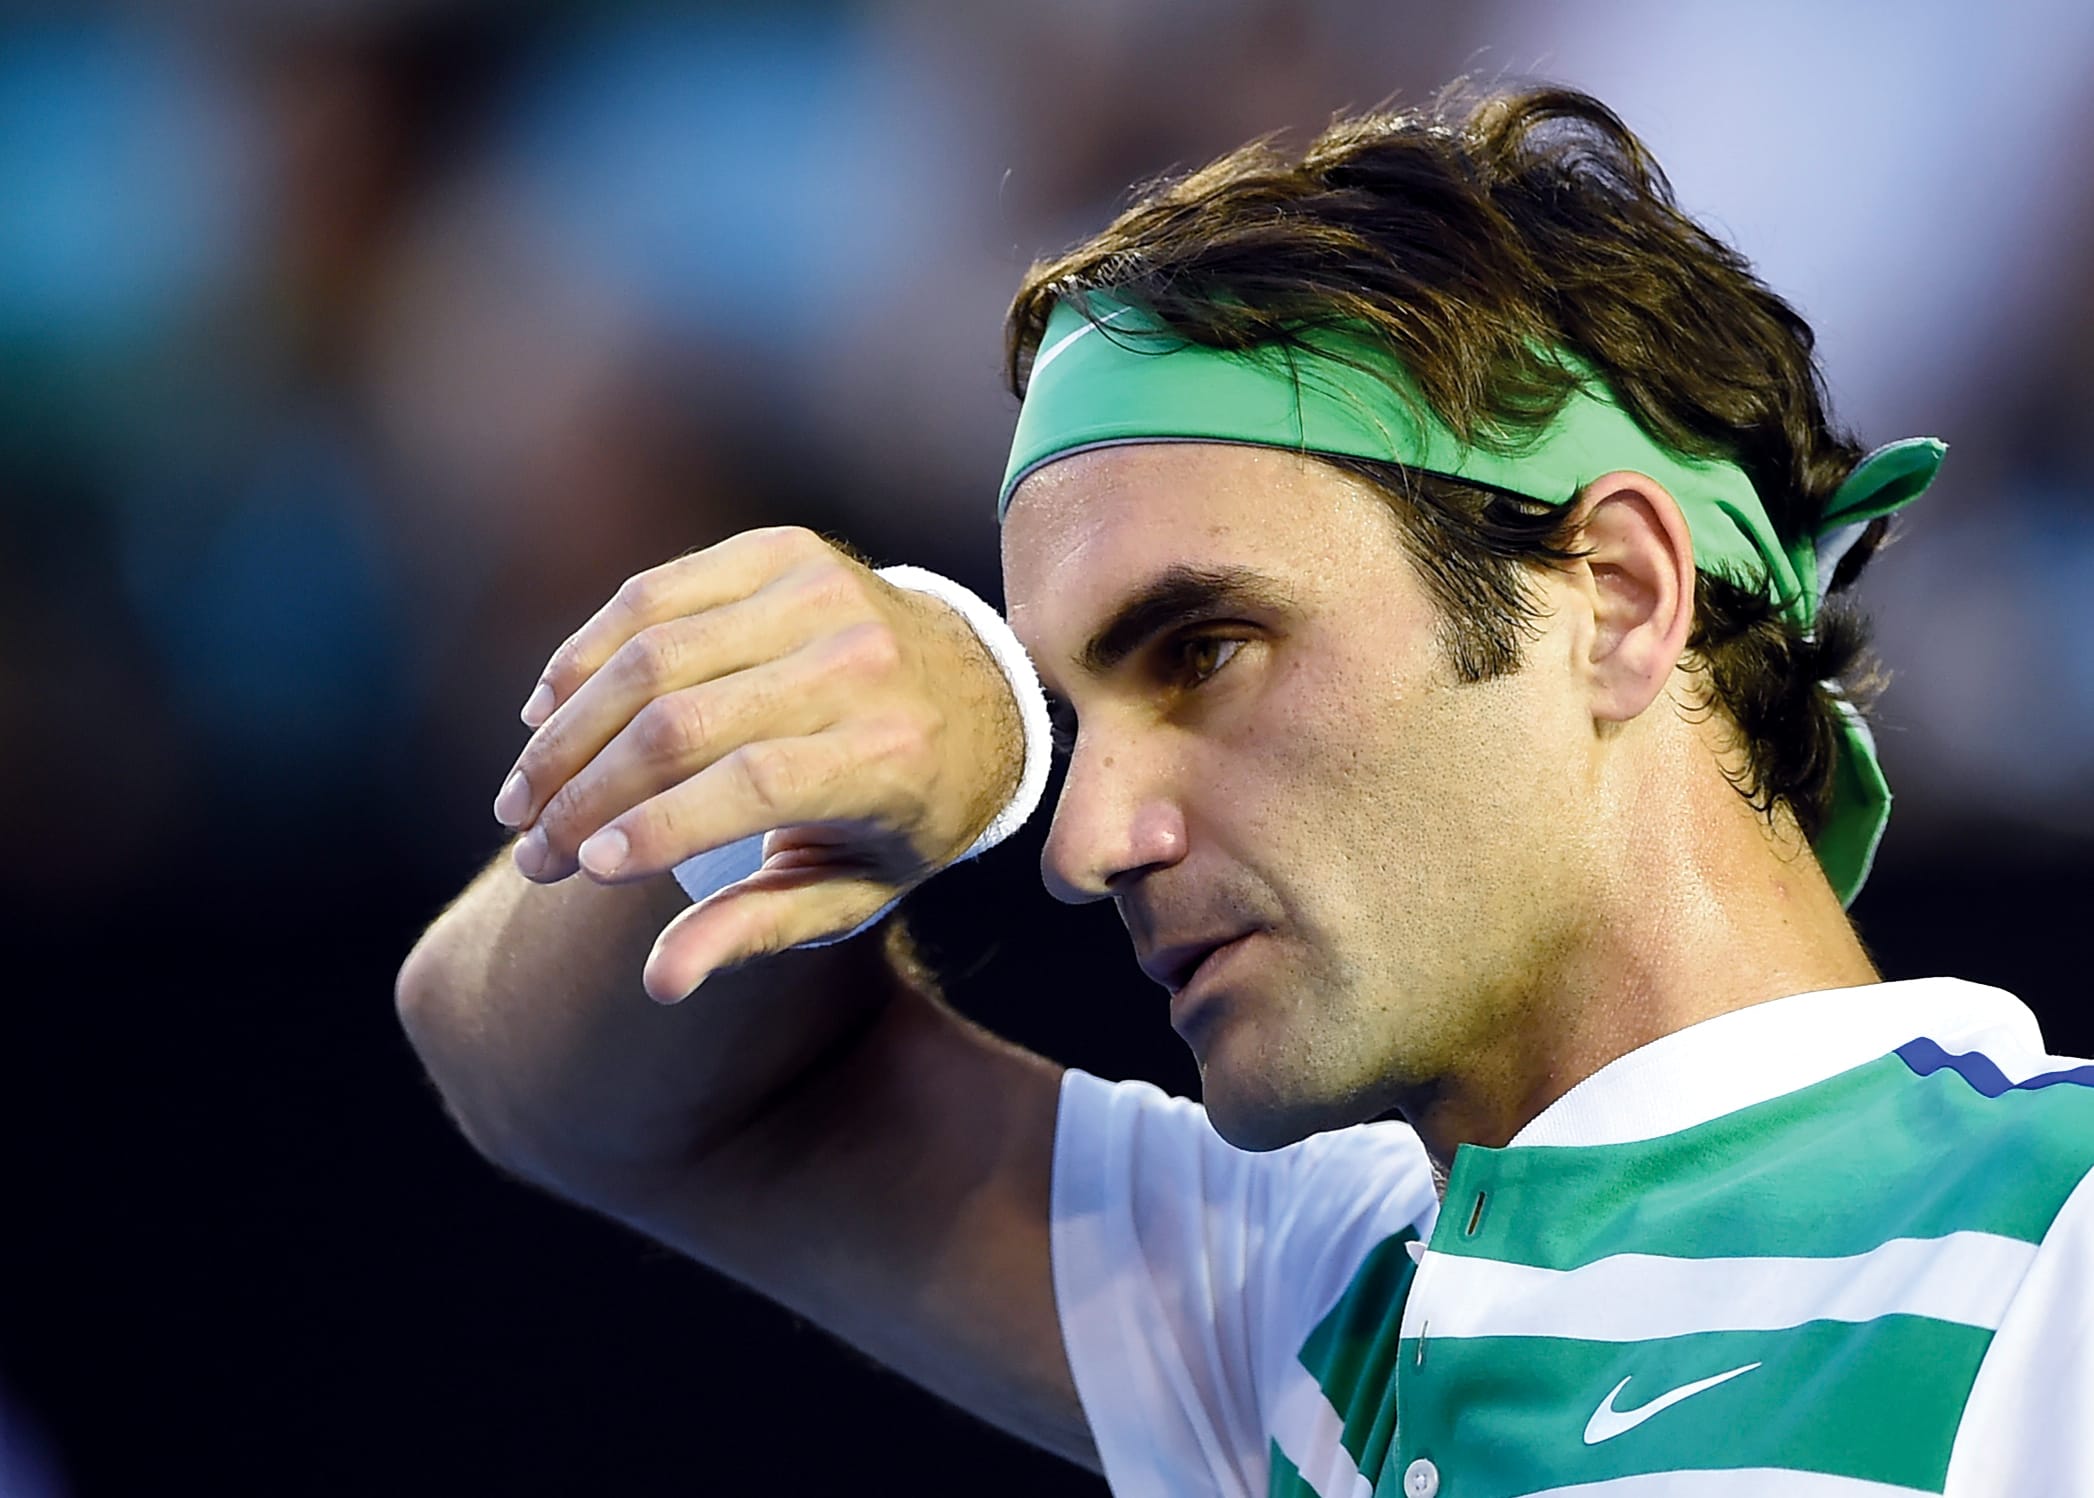 Roger Federer has pulled out of the French Open because of concerns over the risk of injury.